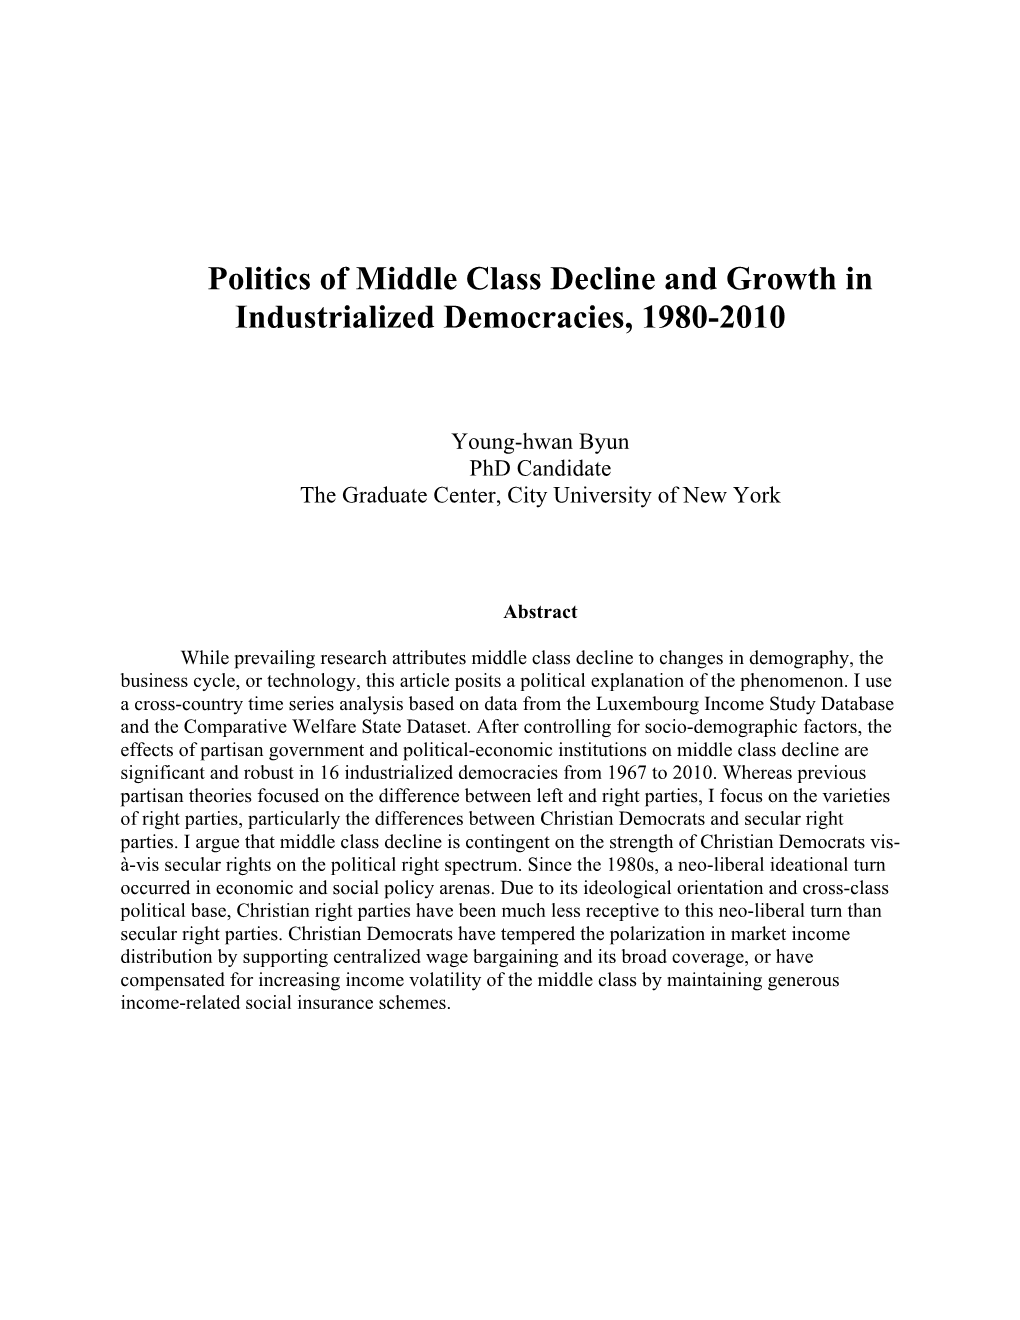 Politics of Middle Class Decline and Growth in Advanced Democracies